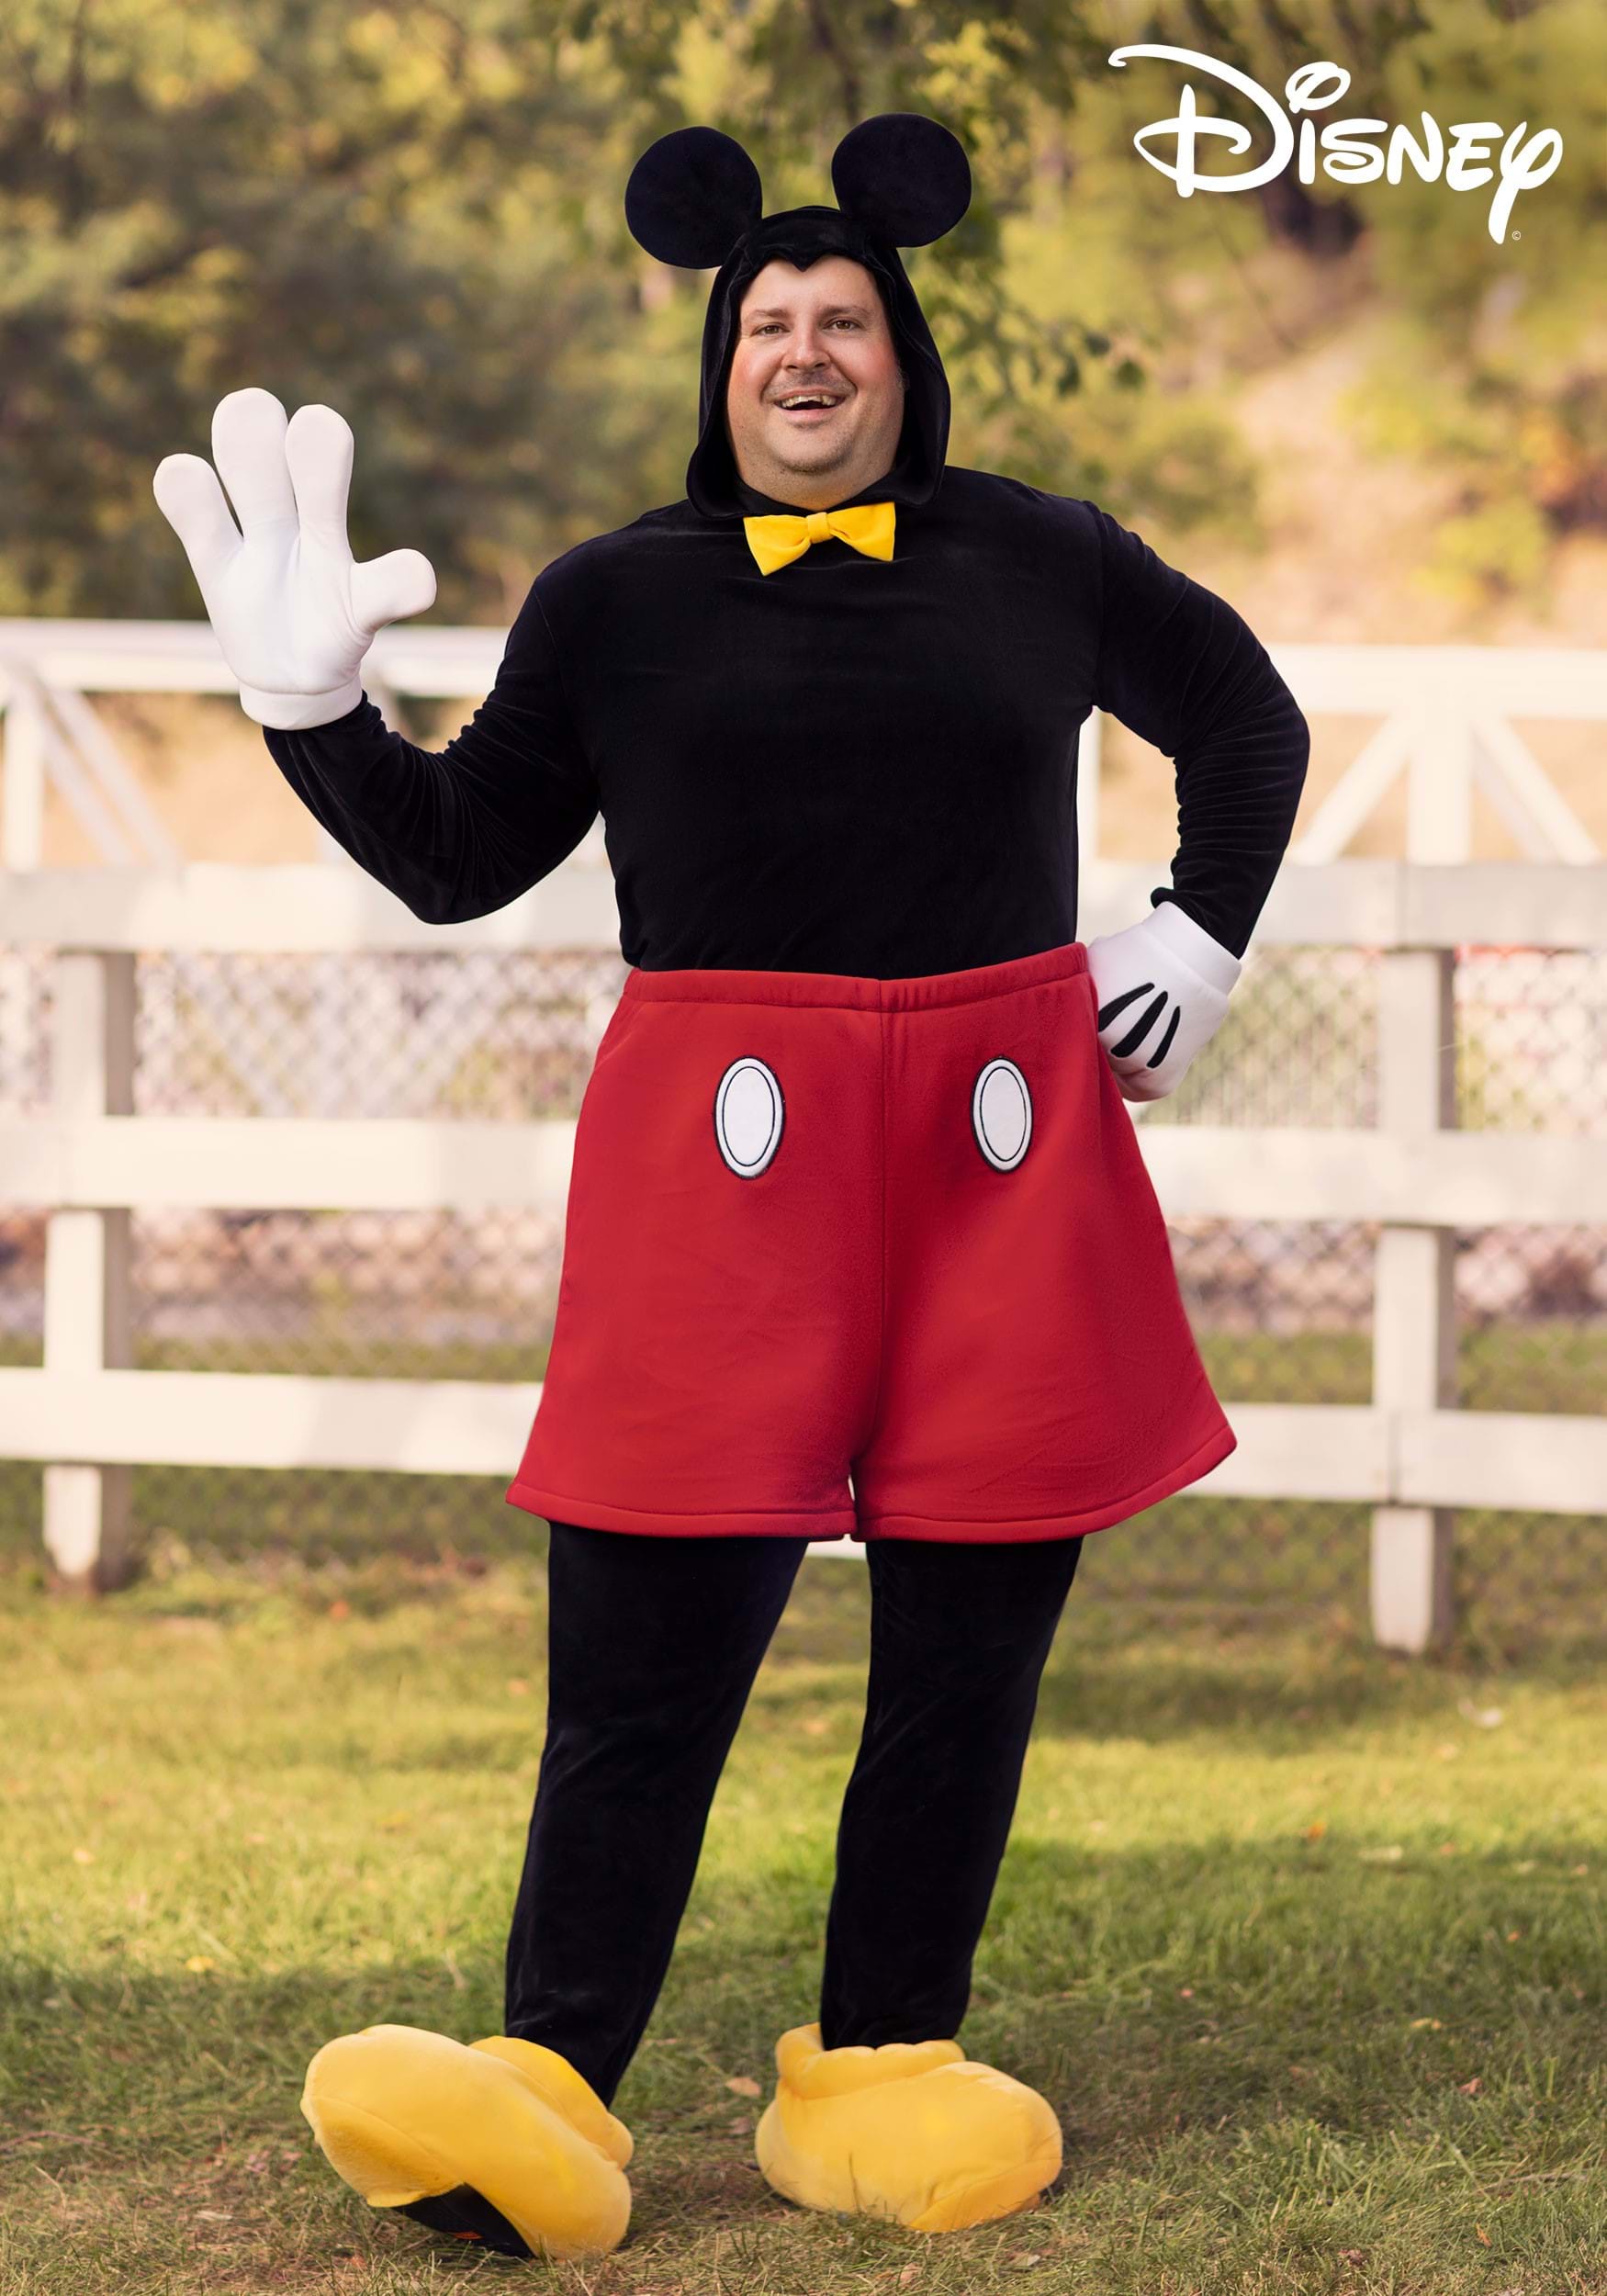 https://images.fun.com/products/74863/1-1/plus-size-disney-deluxe-mickey-mouse-costume.jpg